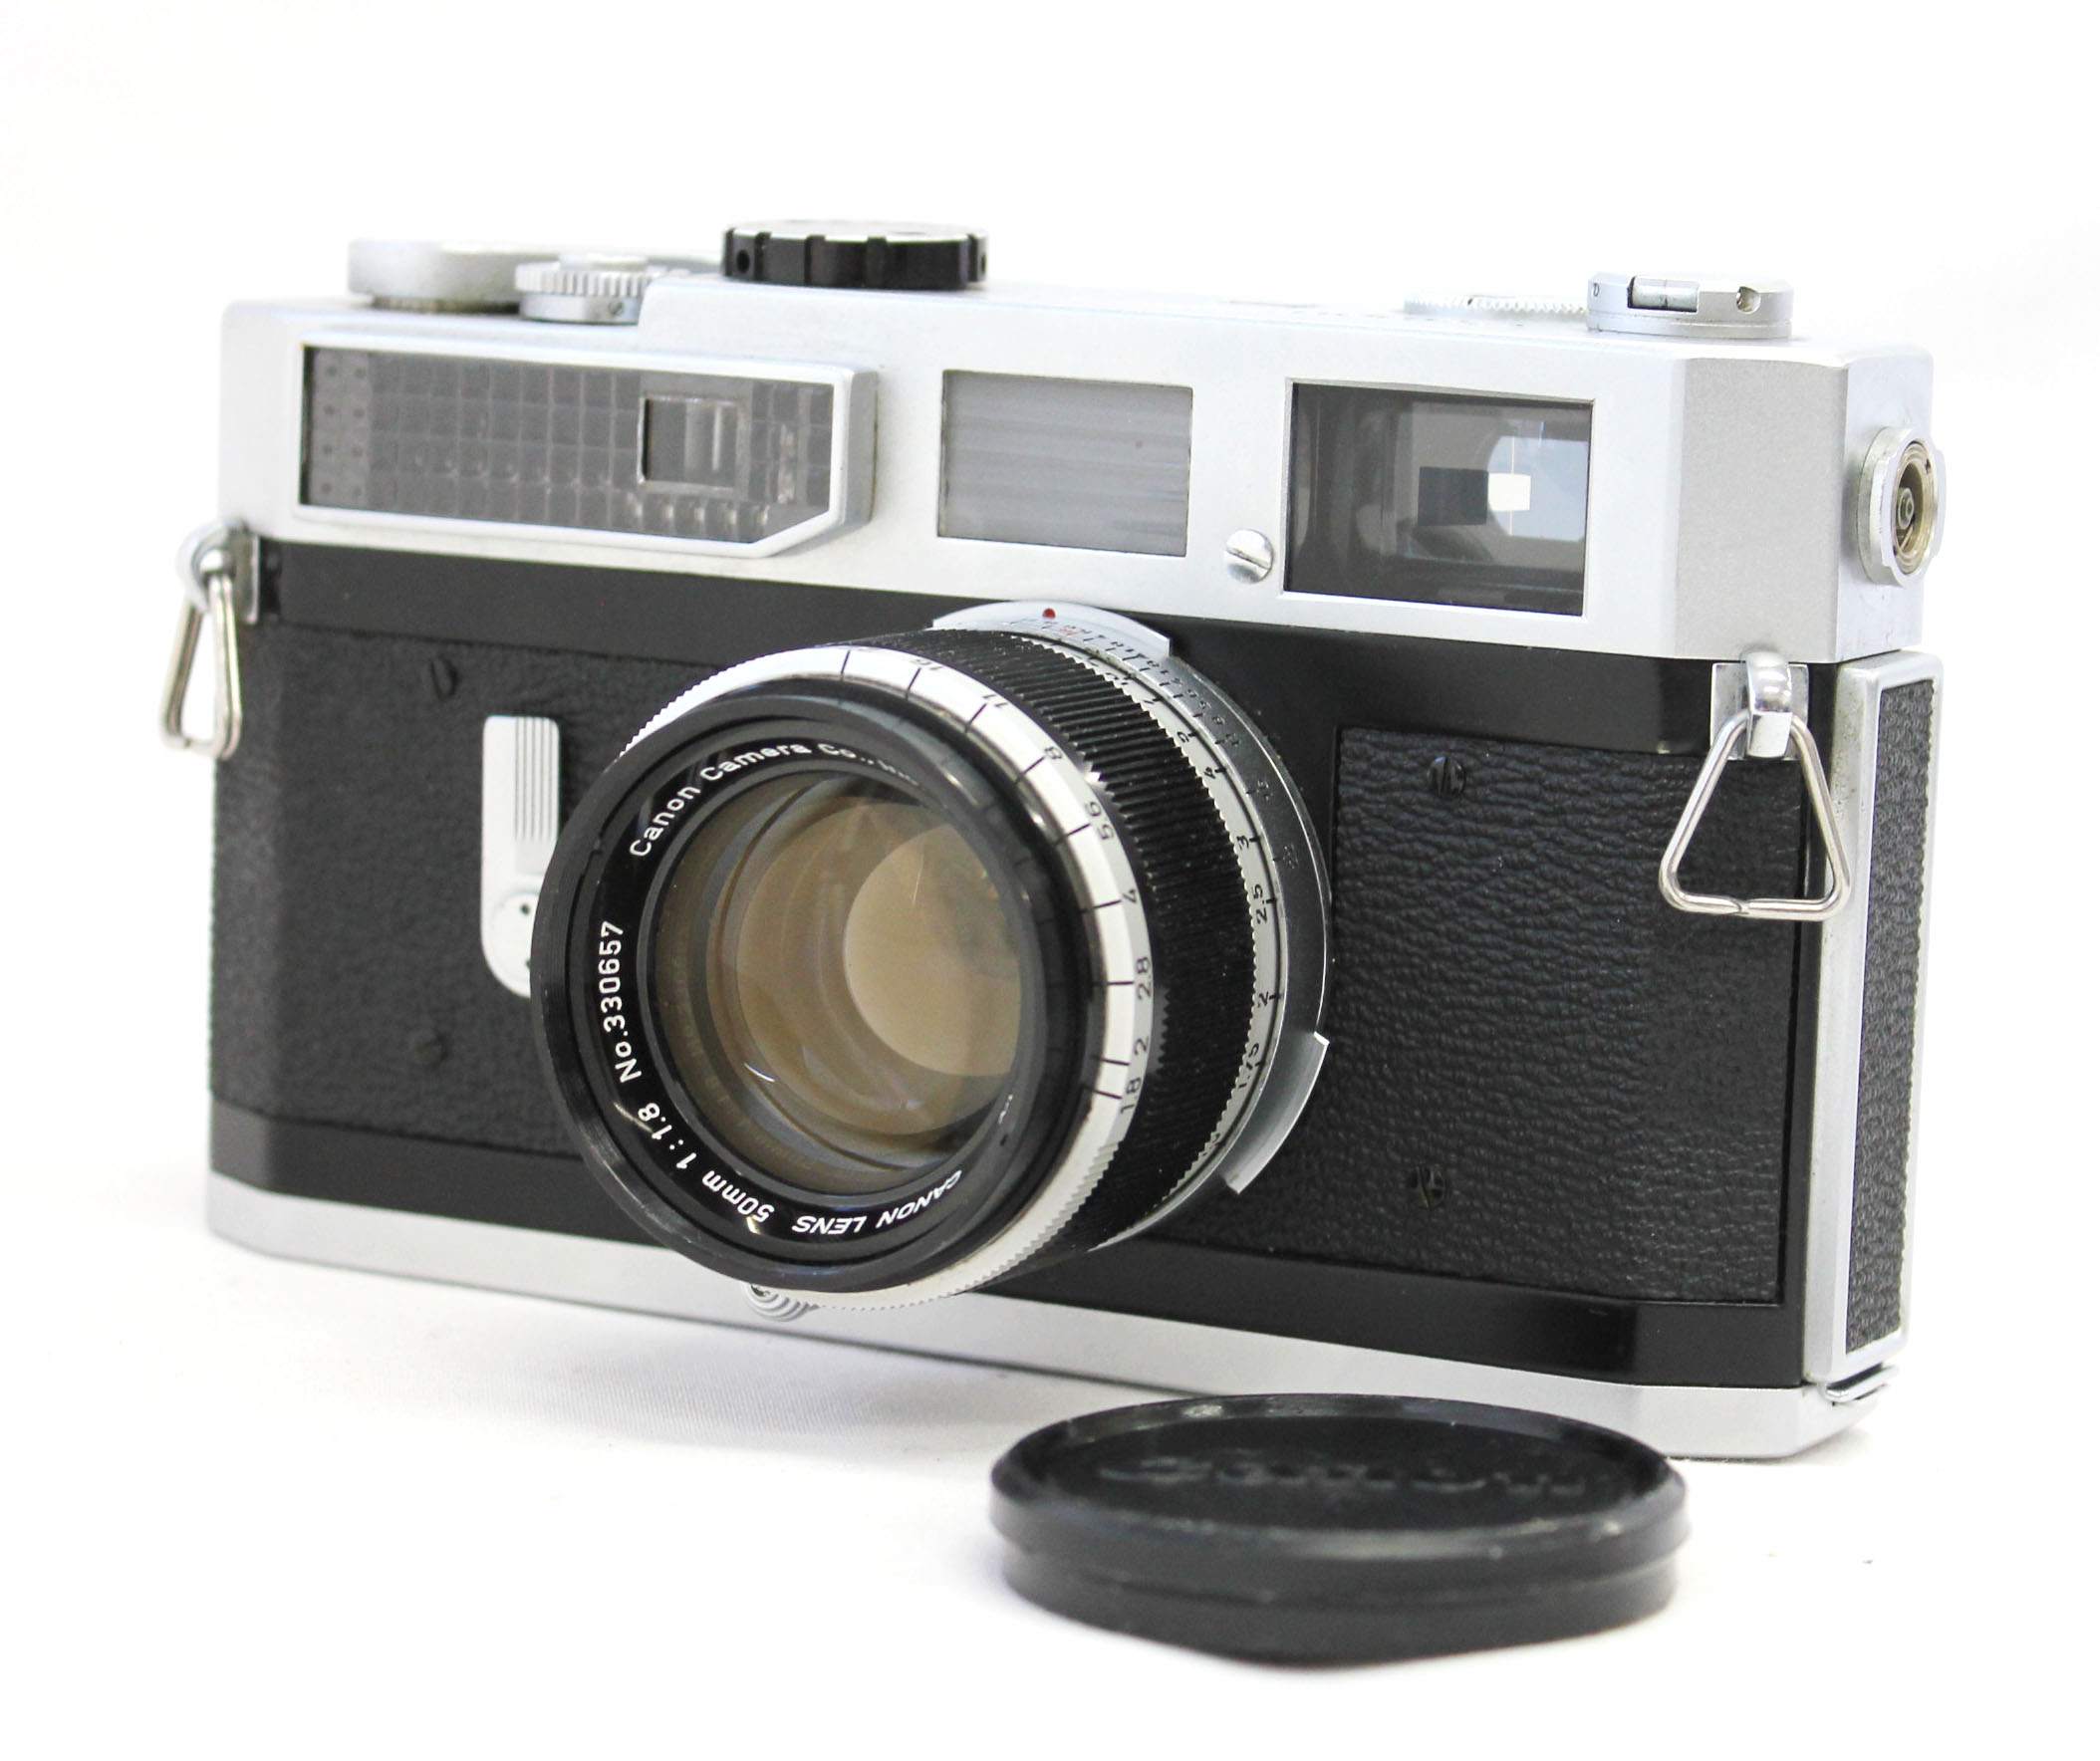 Canon Model 7 Rangefinder Camera with Bonus Lens 50mm F/1.8 Leica L39 Mount from Japan